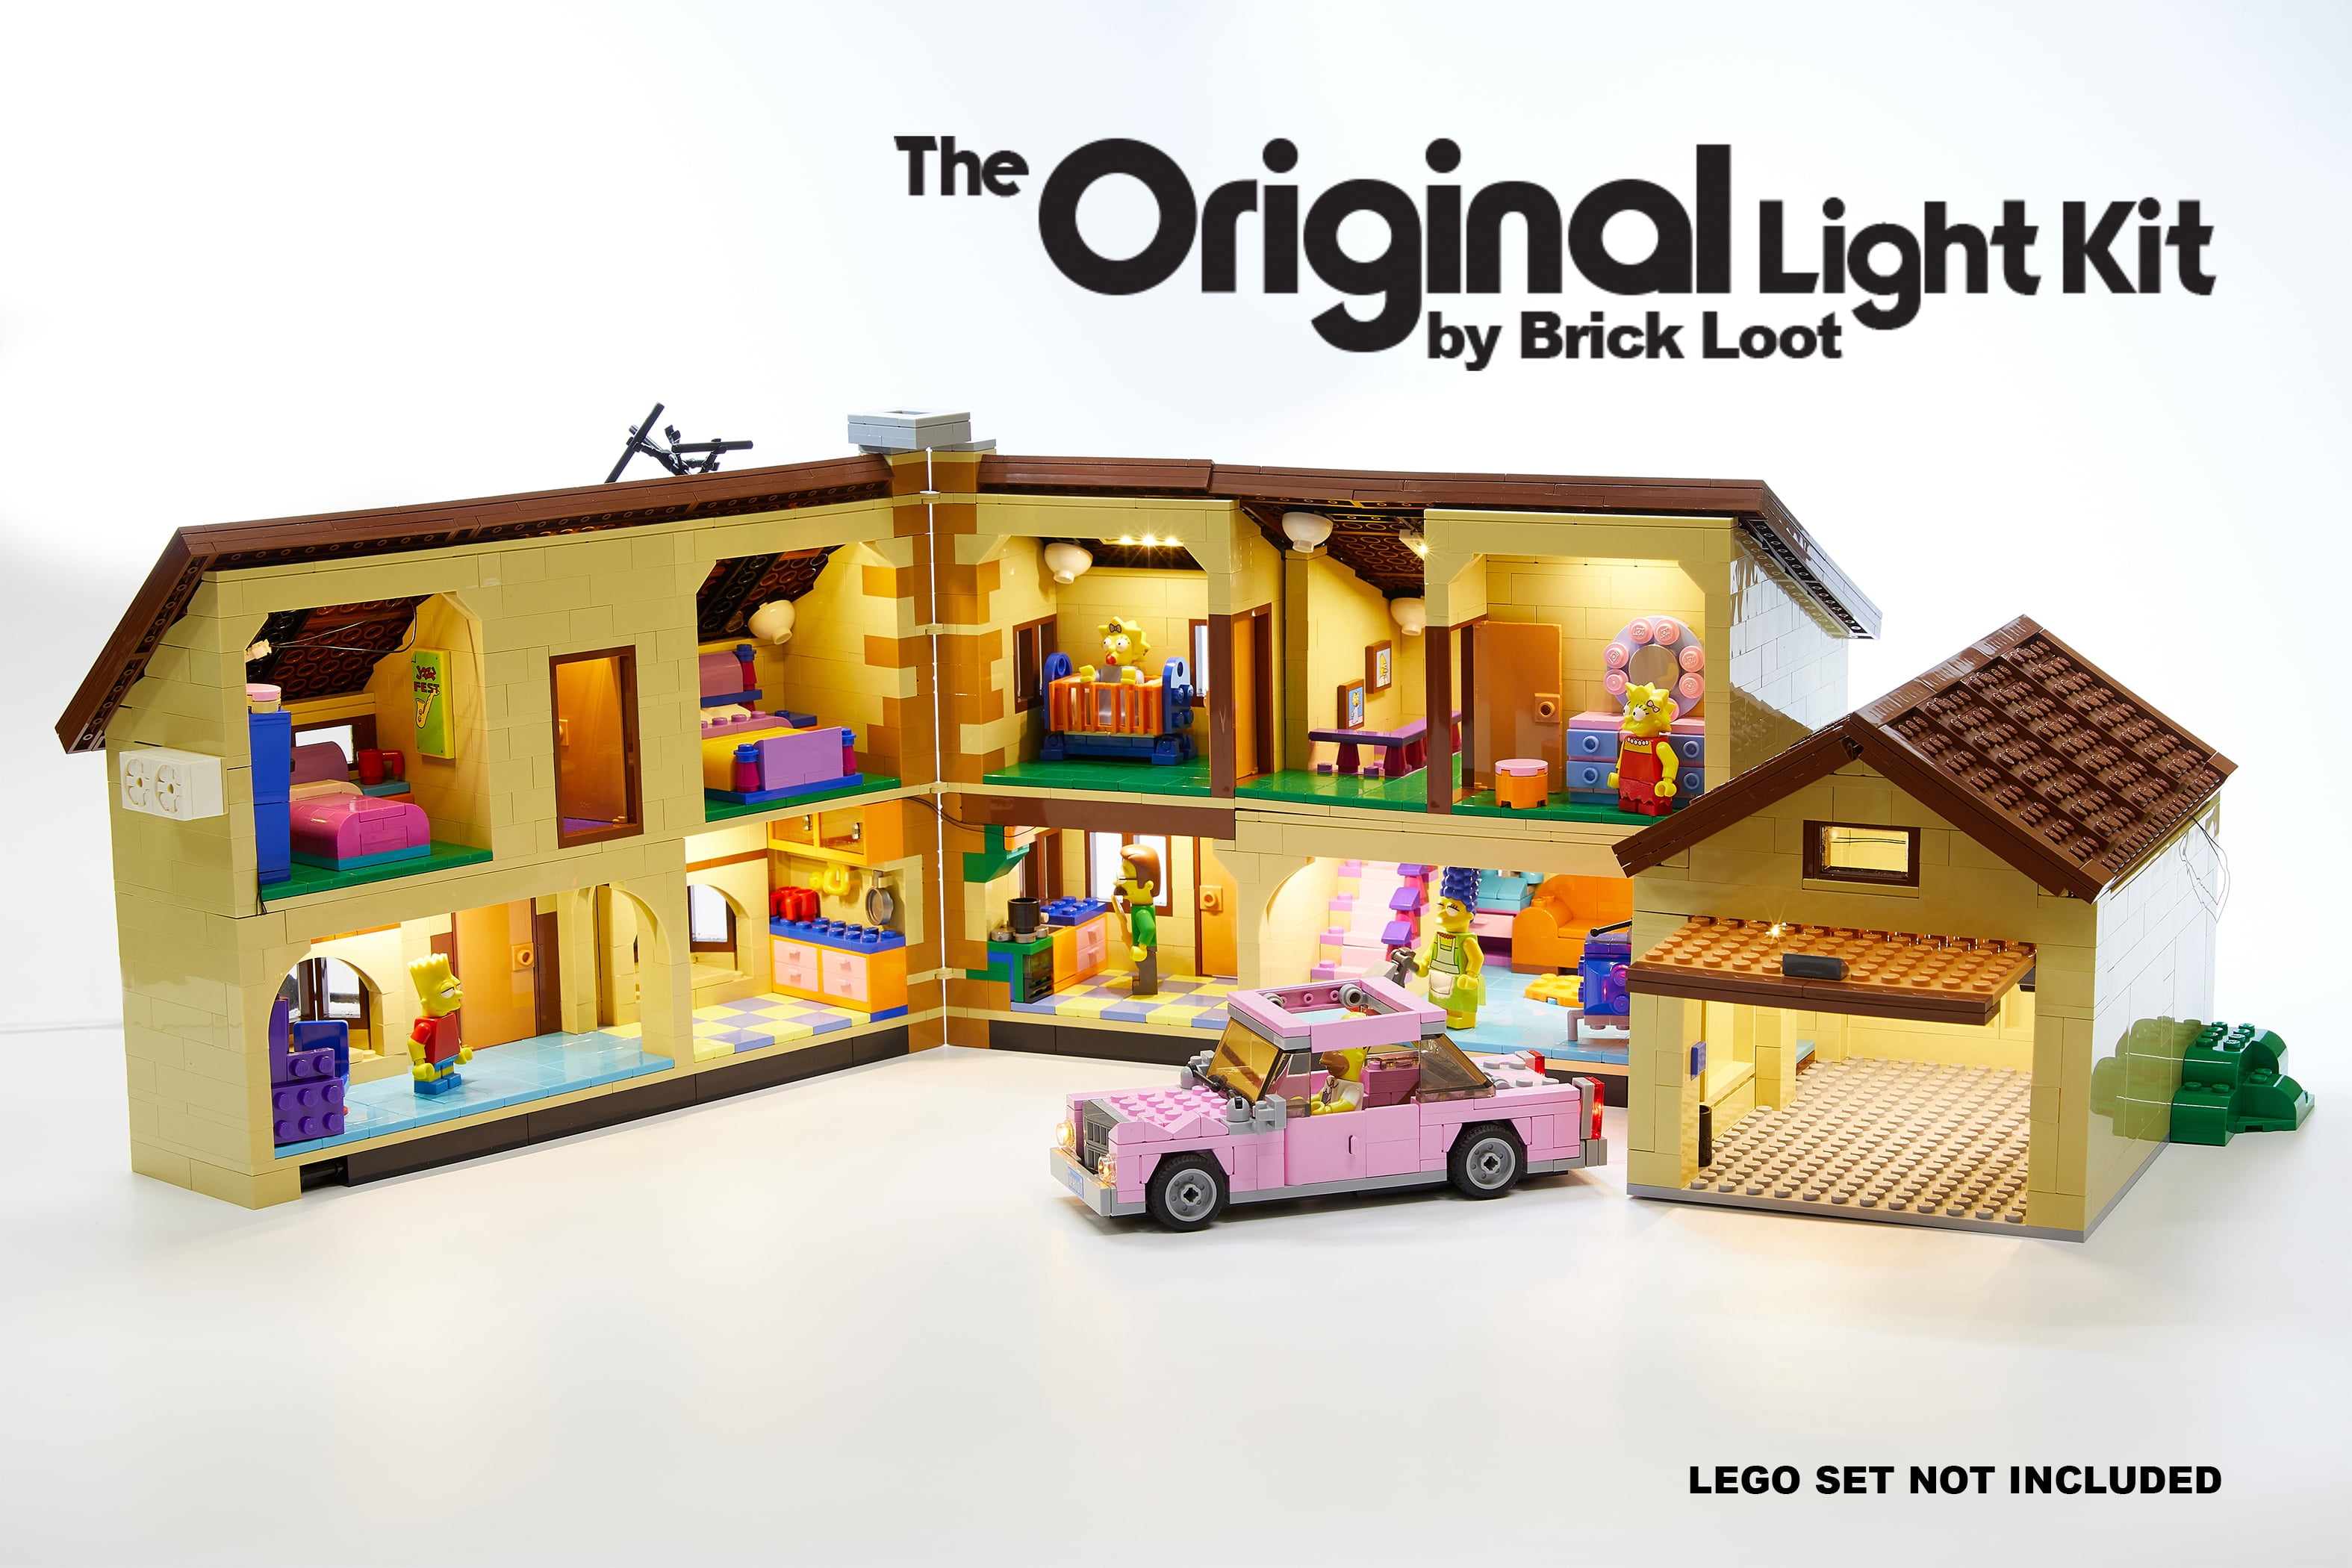 Brick Loot Kit for Your Simpson's House Set 71006 (Lego Set Not Included) - Walmart.com